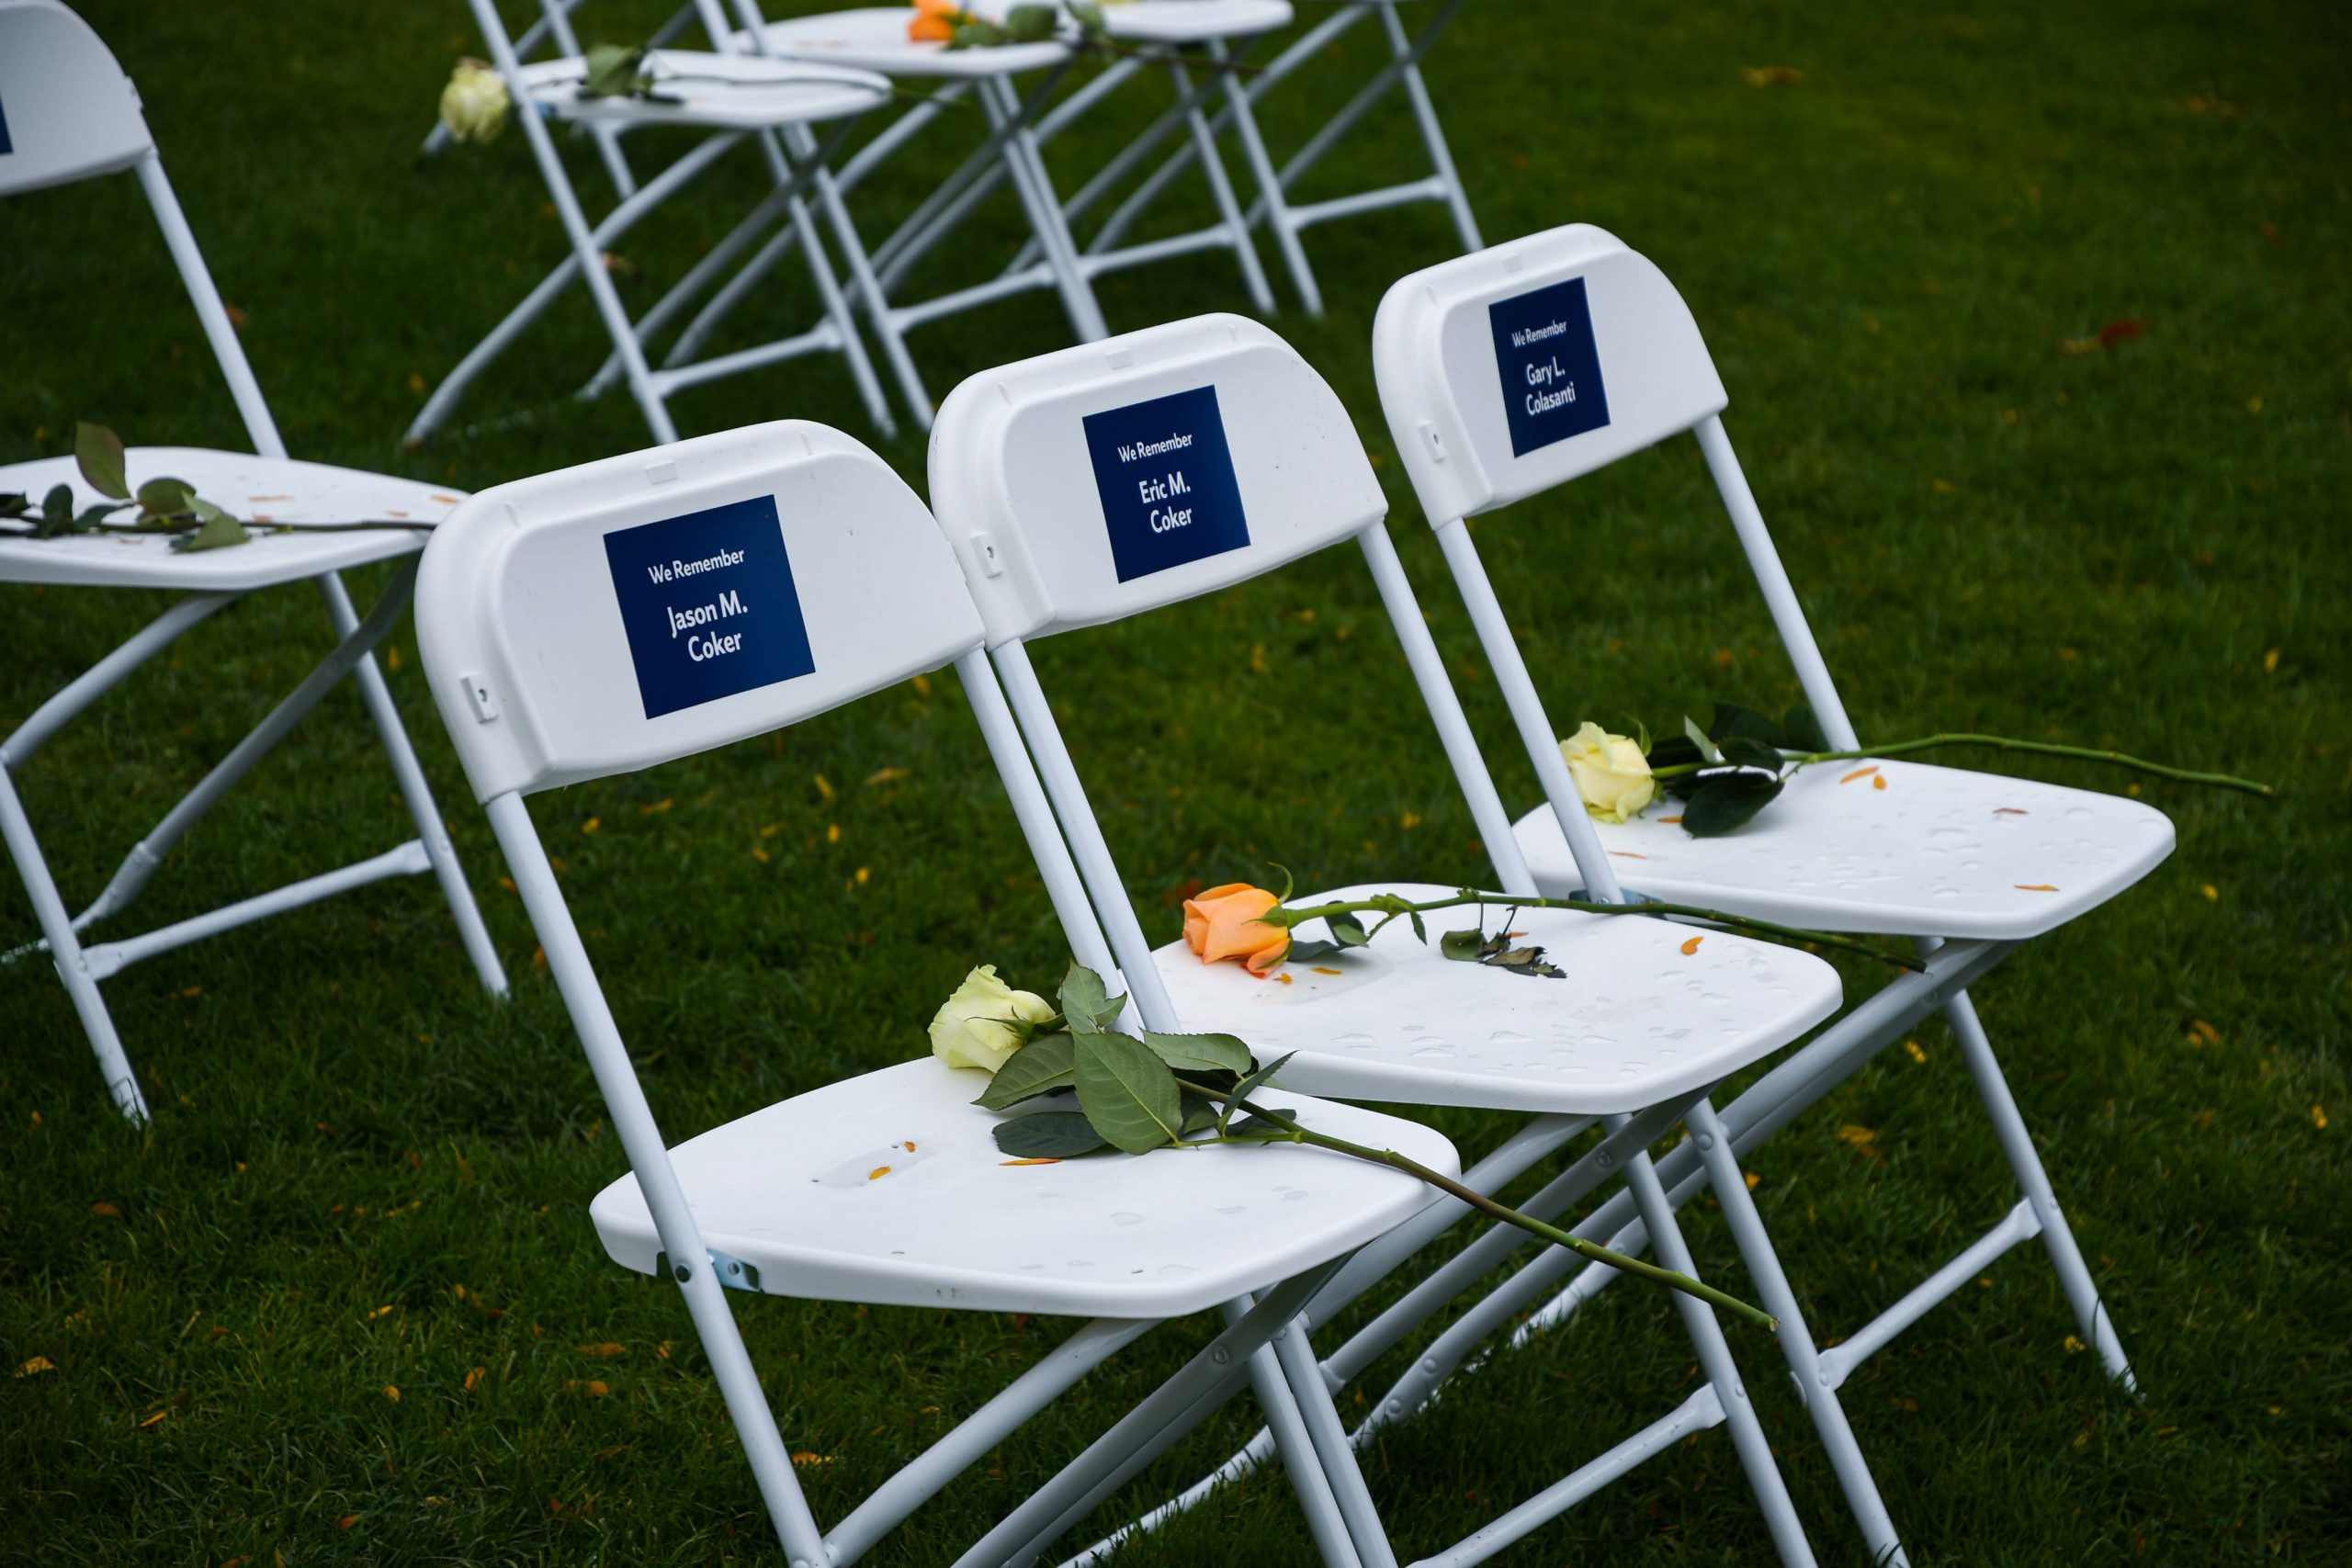 Flowers rest on seats on the quad during Remembrance Week.